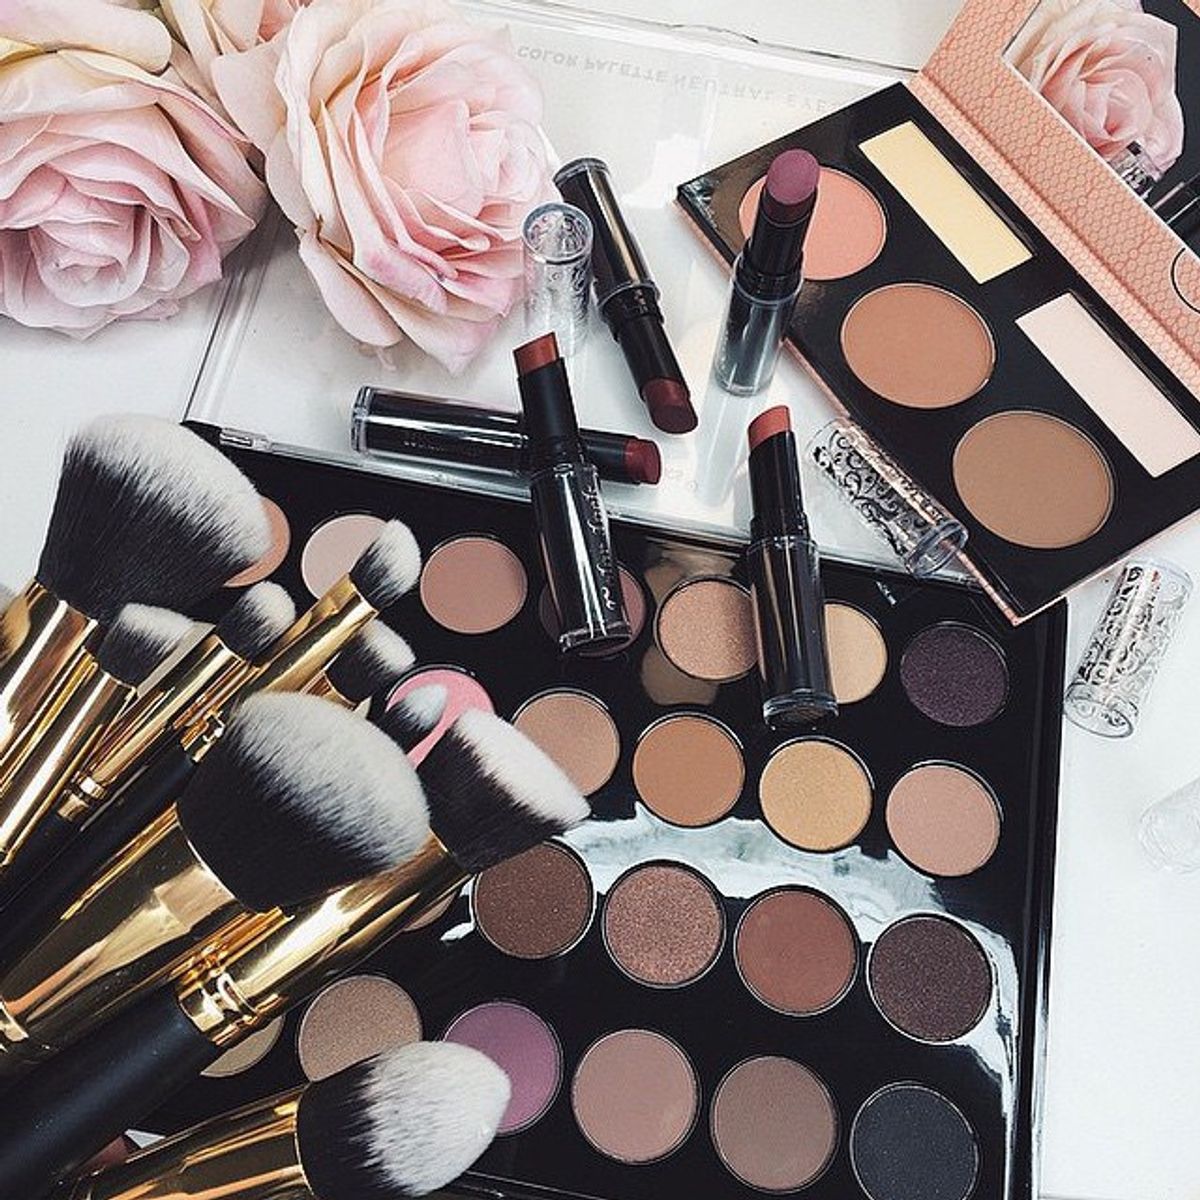 10 Things Girls Who Wear Makeup Don't Want To Hear